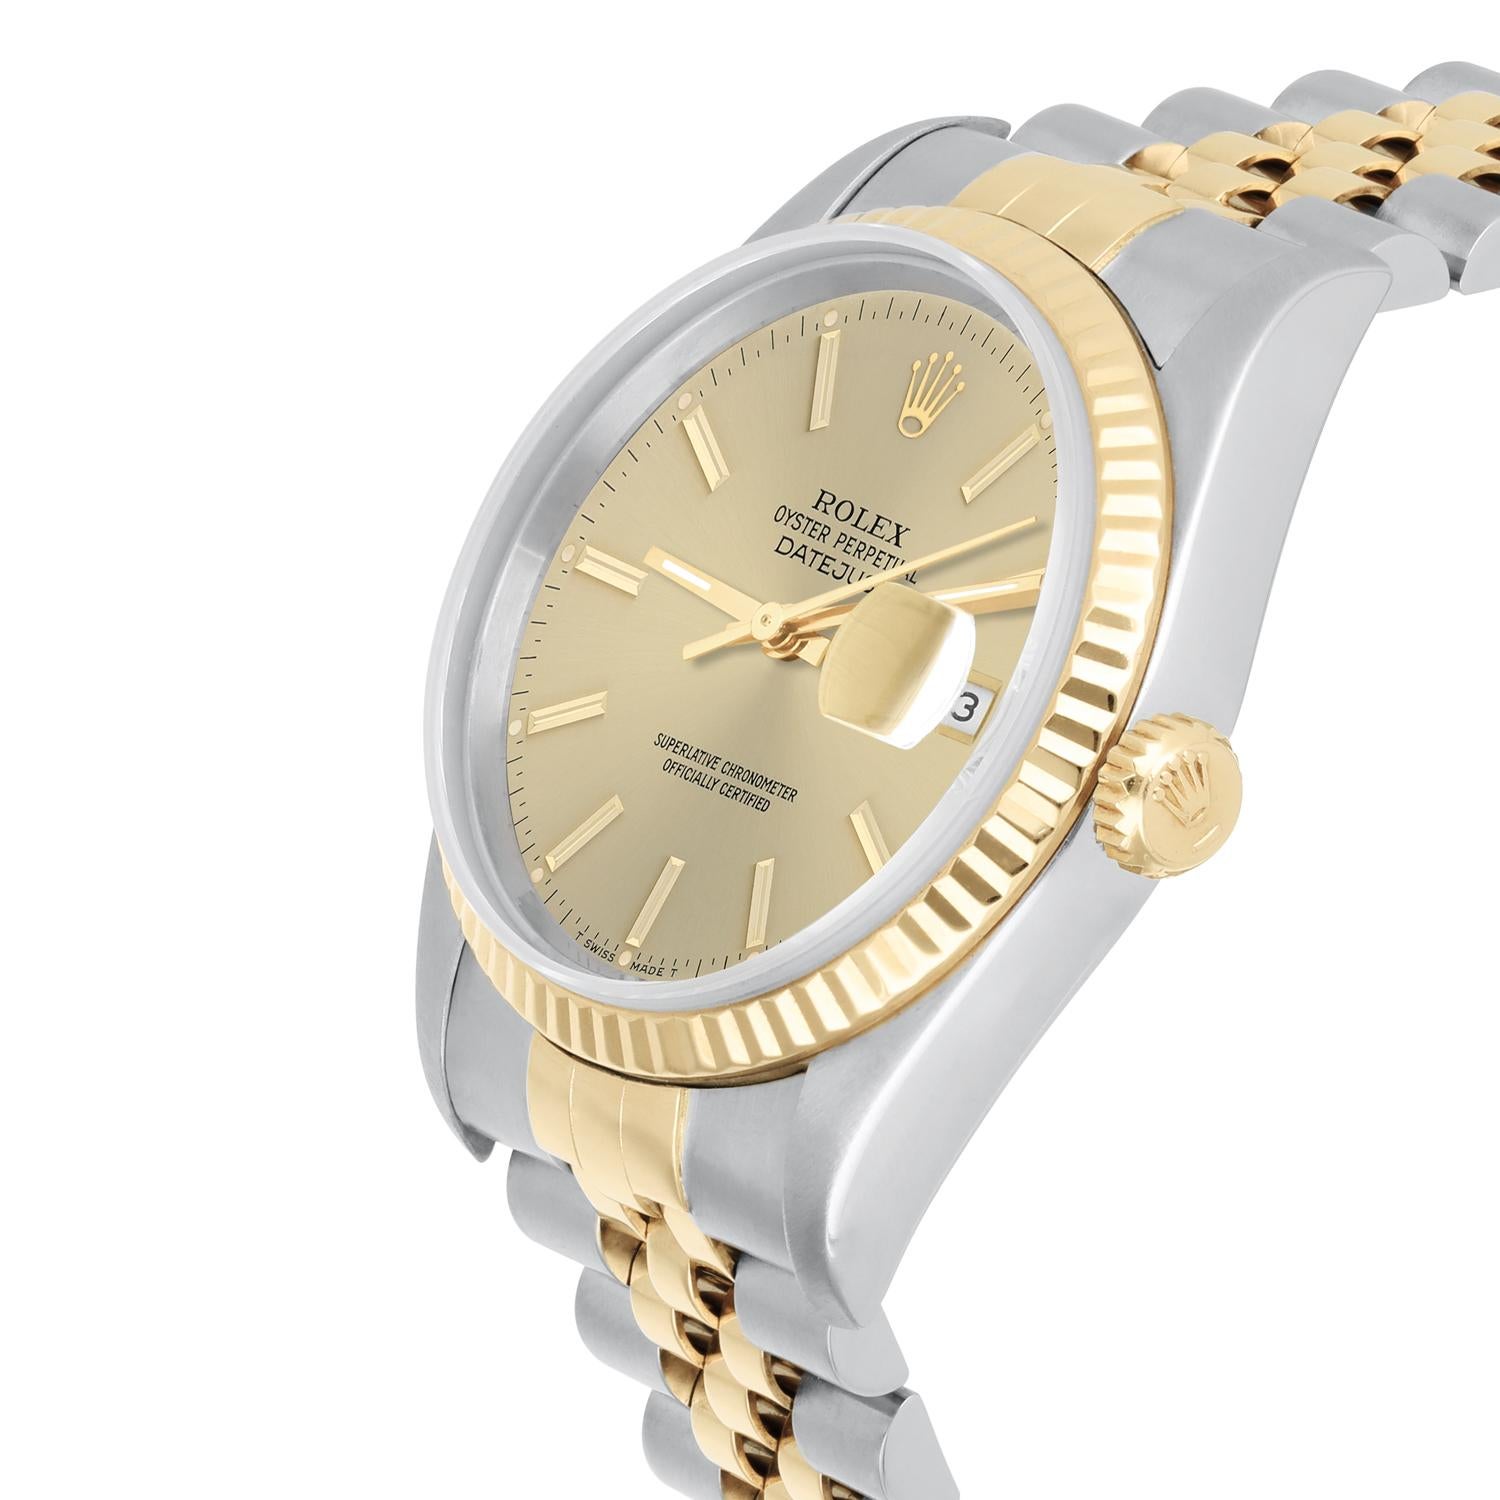 Modern Rolex Datejust 36mm Two Tone Champagne Index Dial Jubilee 16233 Circa 1995 For Sale